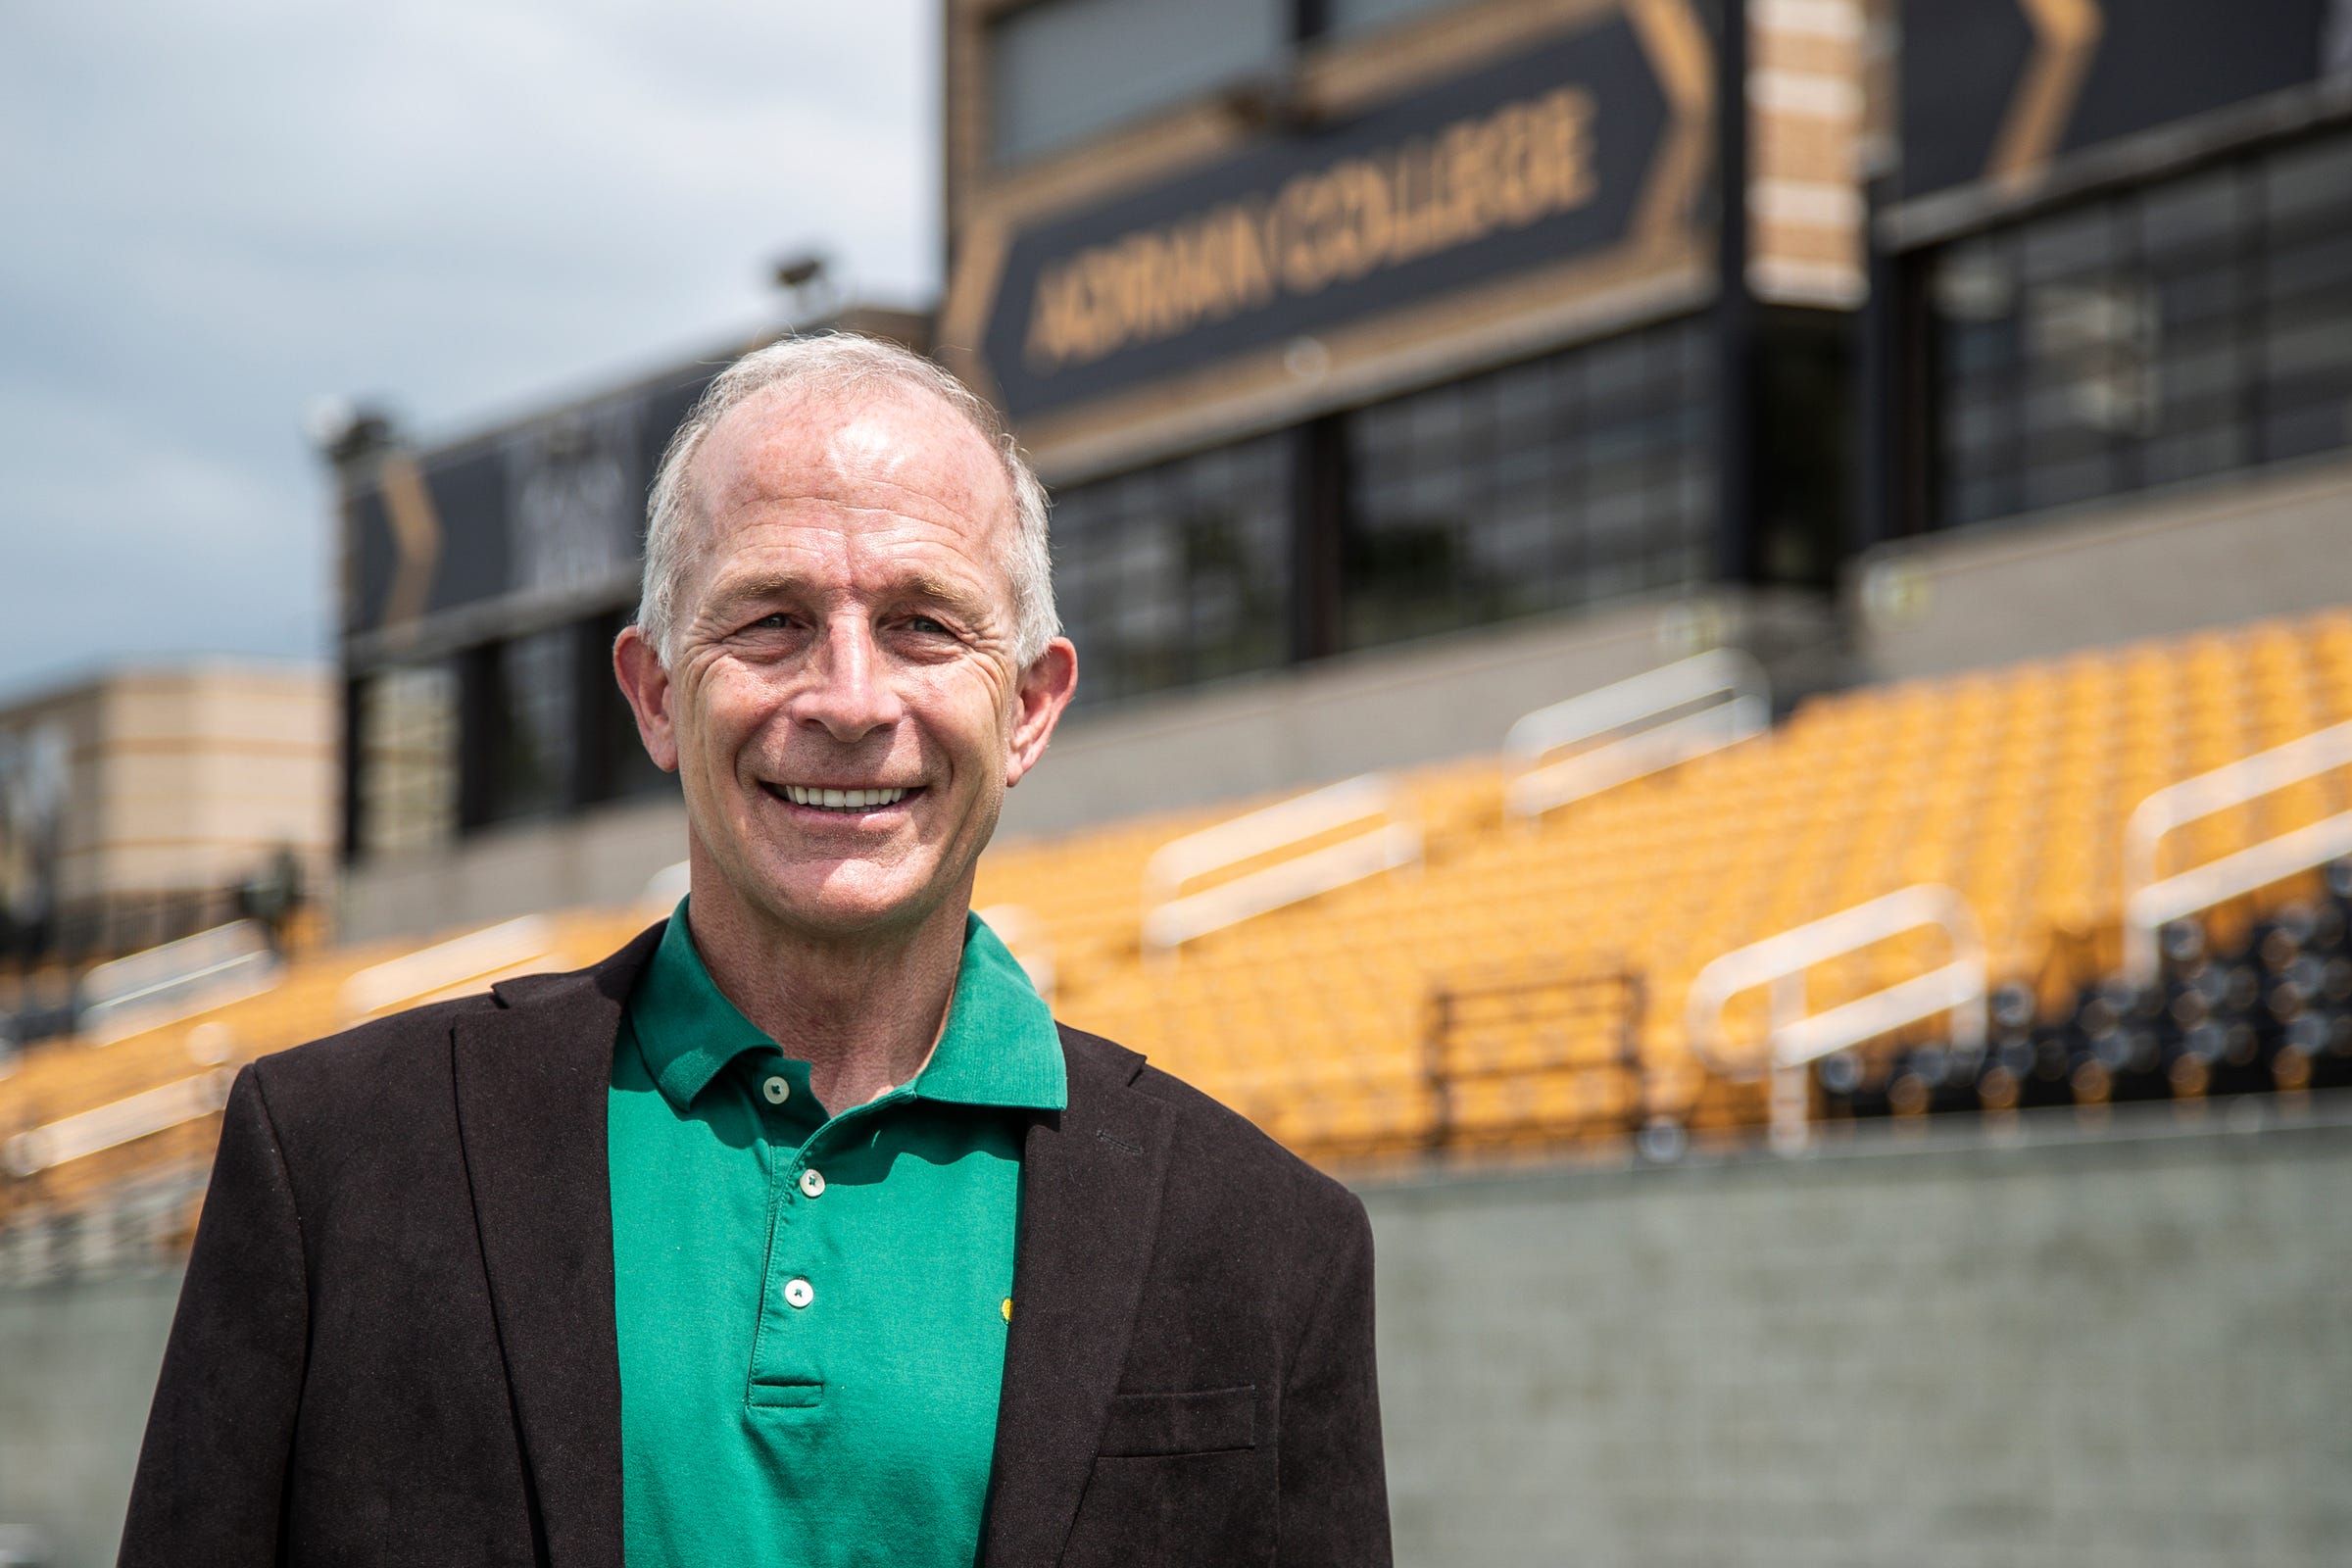 Adrian College President Jeffrey Docking poses for a photo at the Docking Stadium of Adrian College in Adrian on Aug. 14, 2020.